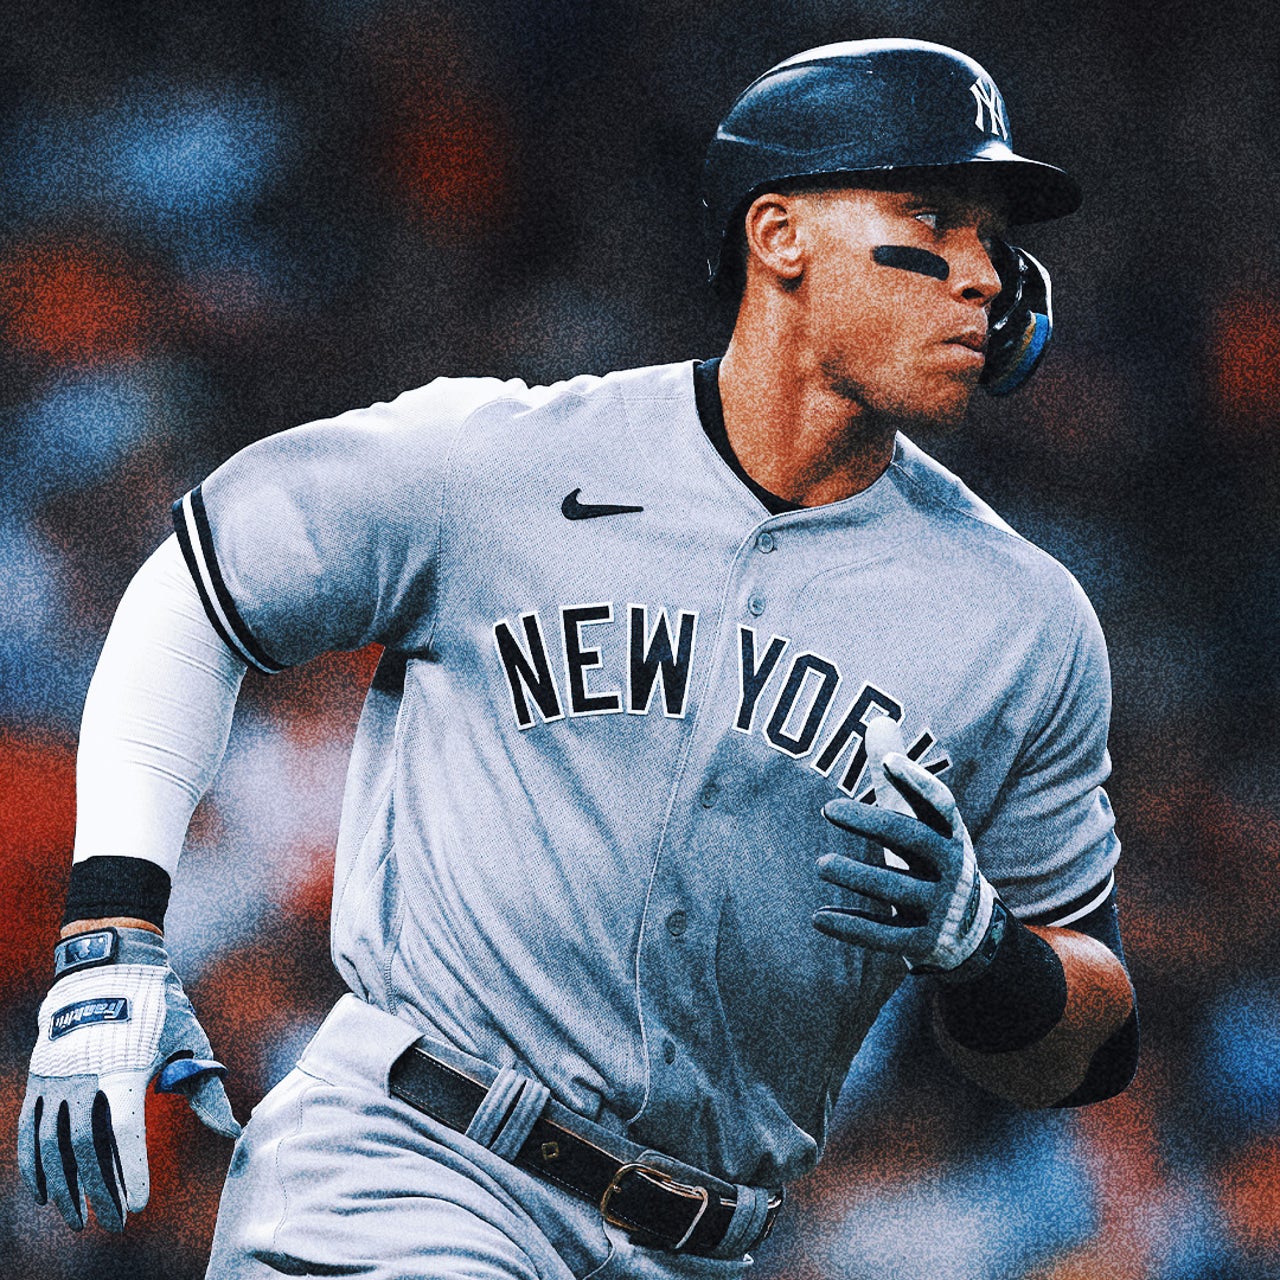 Yankees Owner Closed Aaron Judge Deal on Italian Vacation